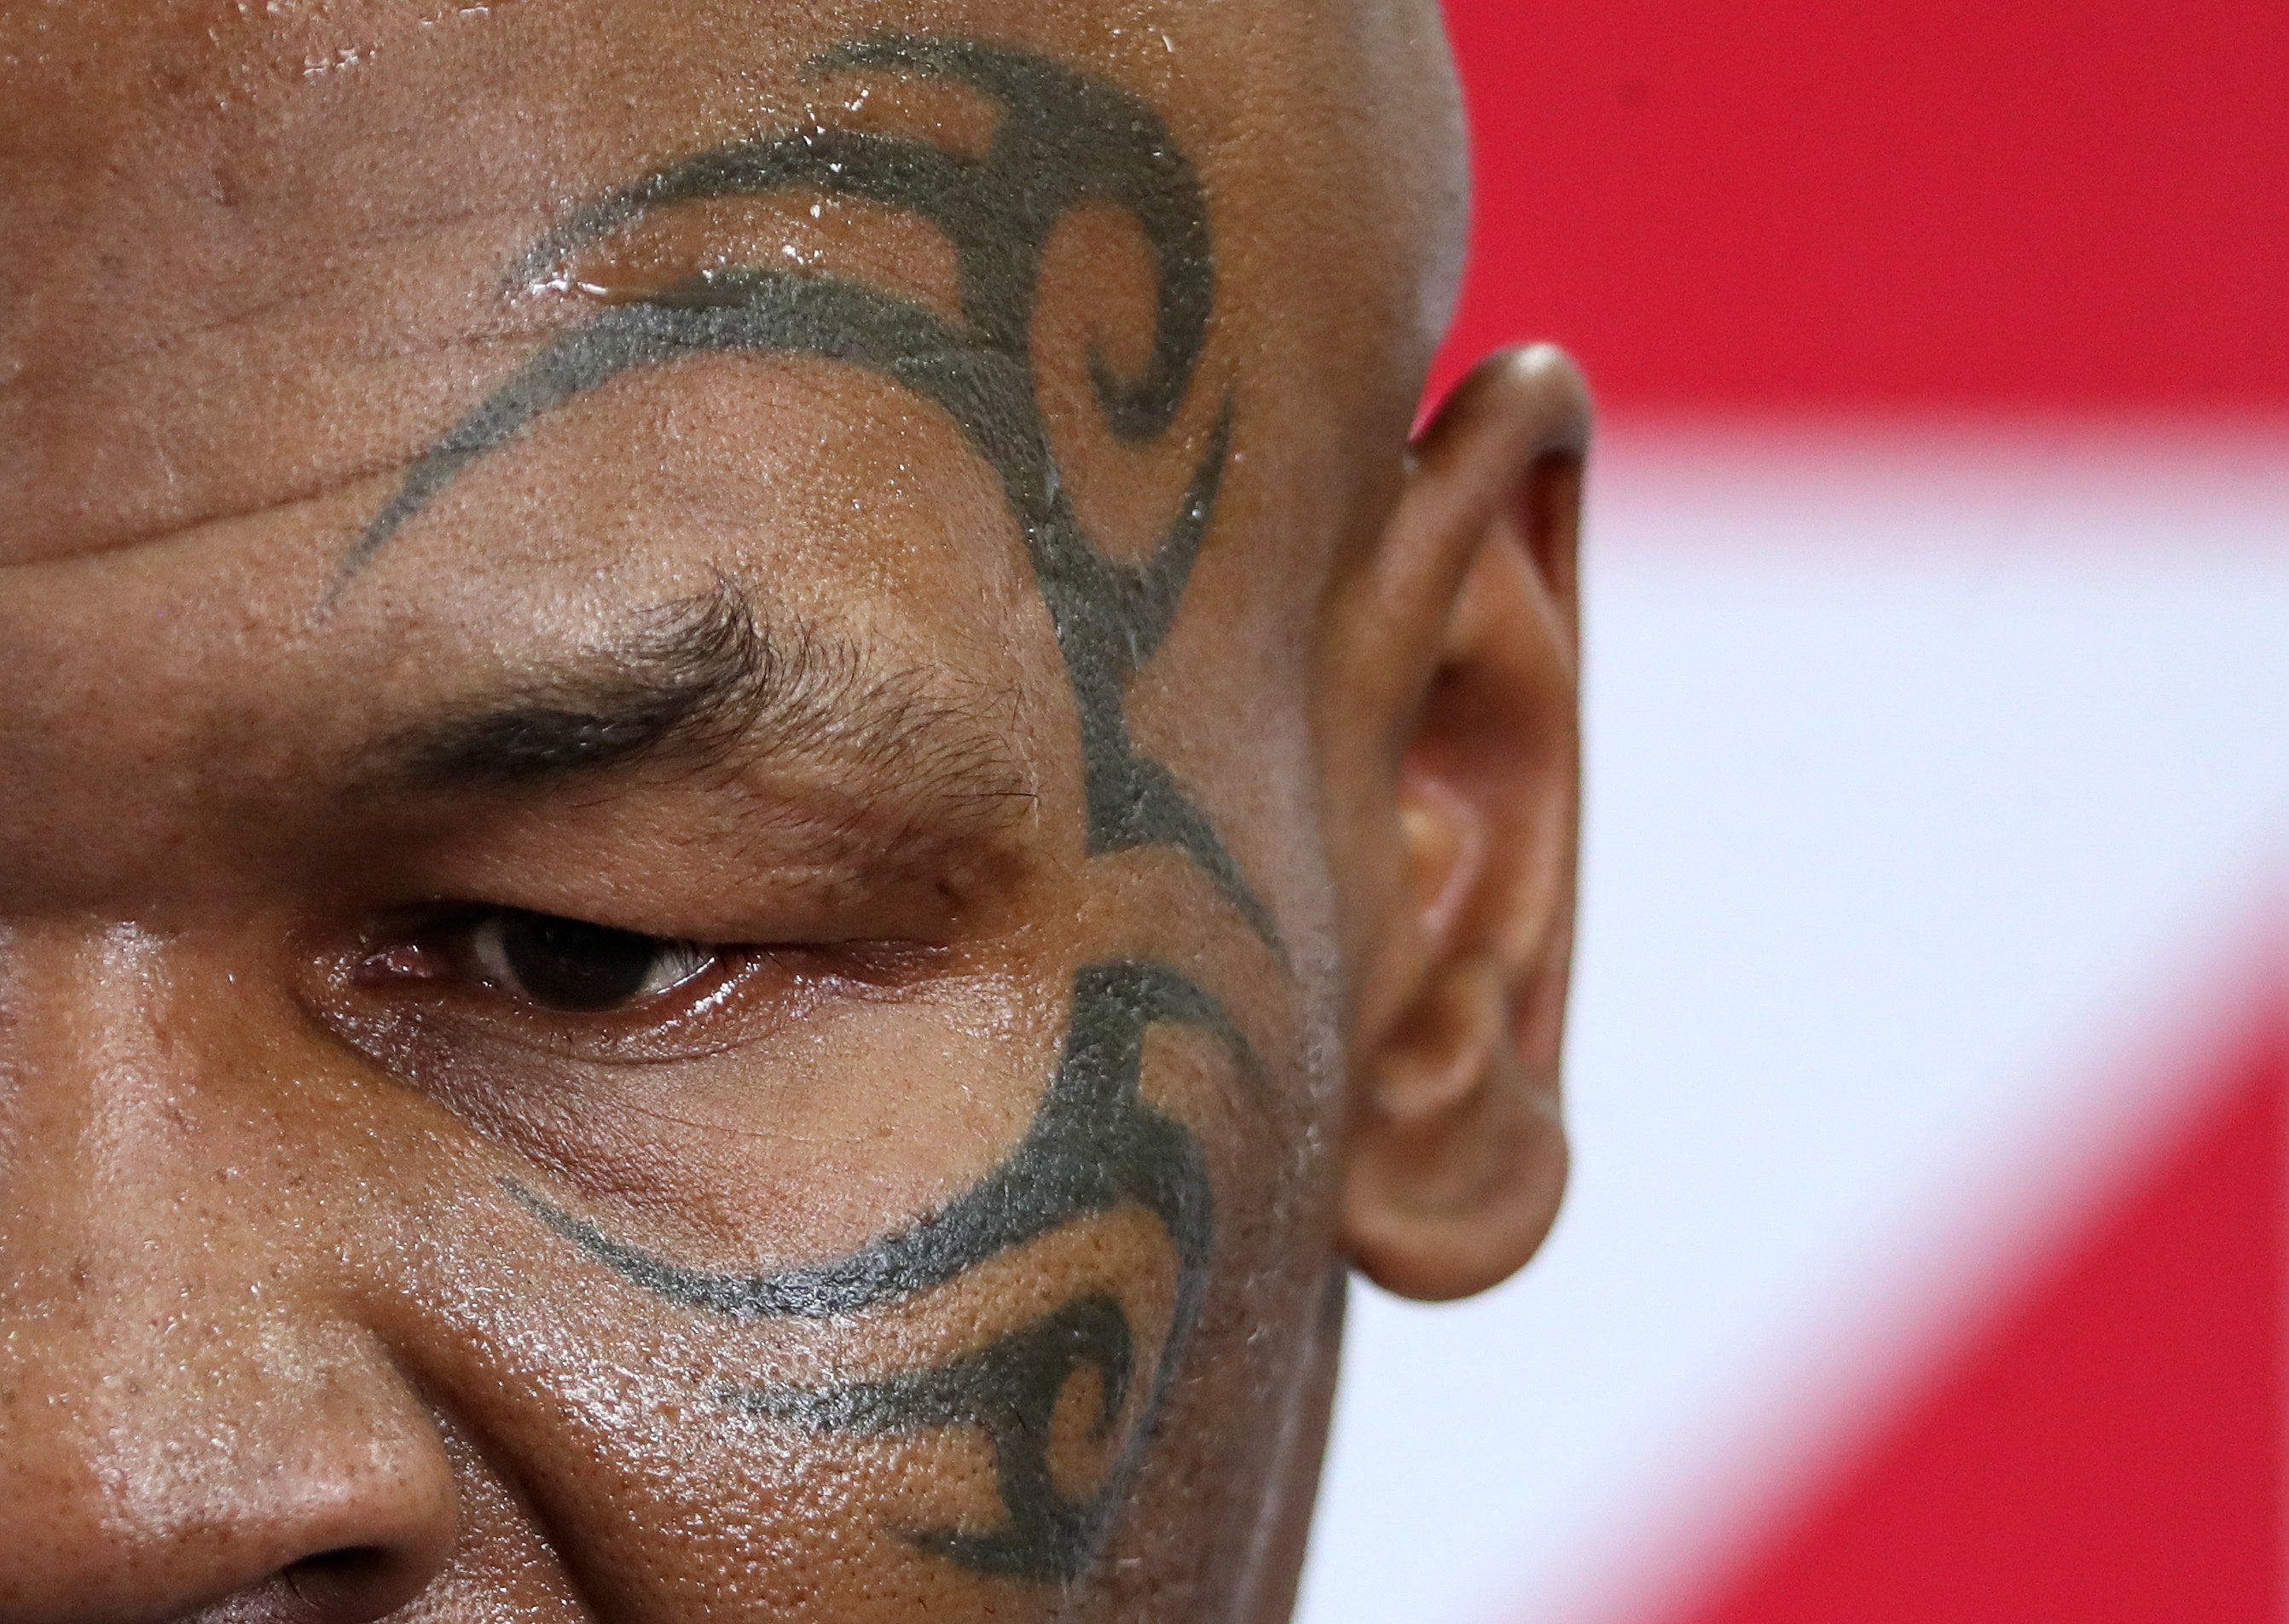 Mike Tyson Almost Got An Even Crazier Tattoo On His Face Thankfully He Didn T